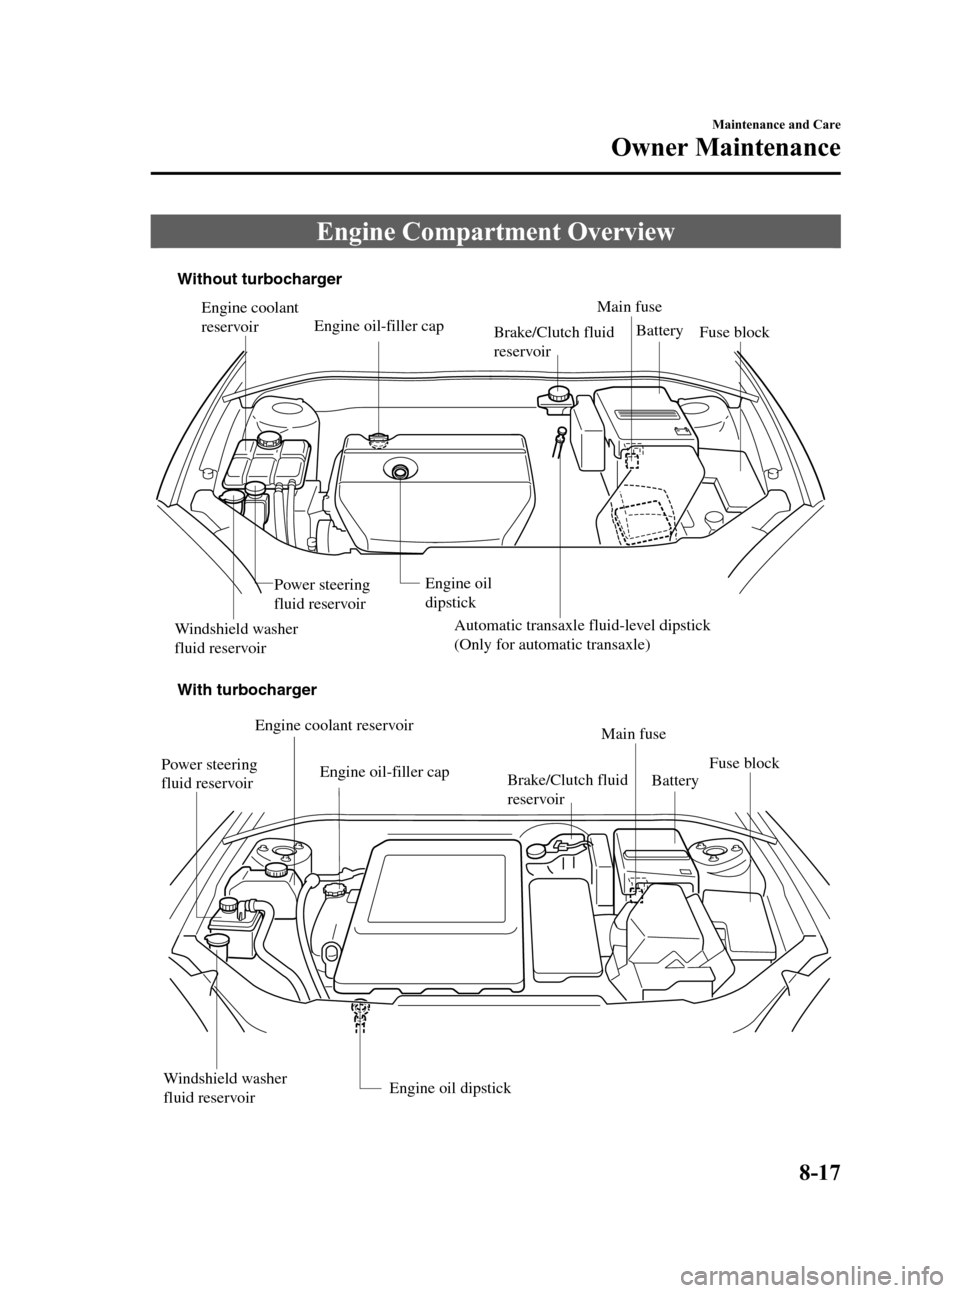 MAZDA MODEL 3 HATCHBACK 2007   (in English) Owners Guide Black plate (291,1)
Engine Compartment Overview
Main fuse
Automatic transaxle fluid-level dipstick 
(Only for automatic transaxle)Brake/Clutch fluid 
reservoir Engine coolant 
reservoir
Engine oil 
di